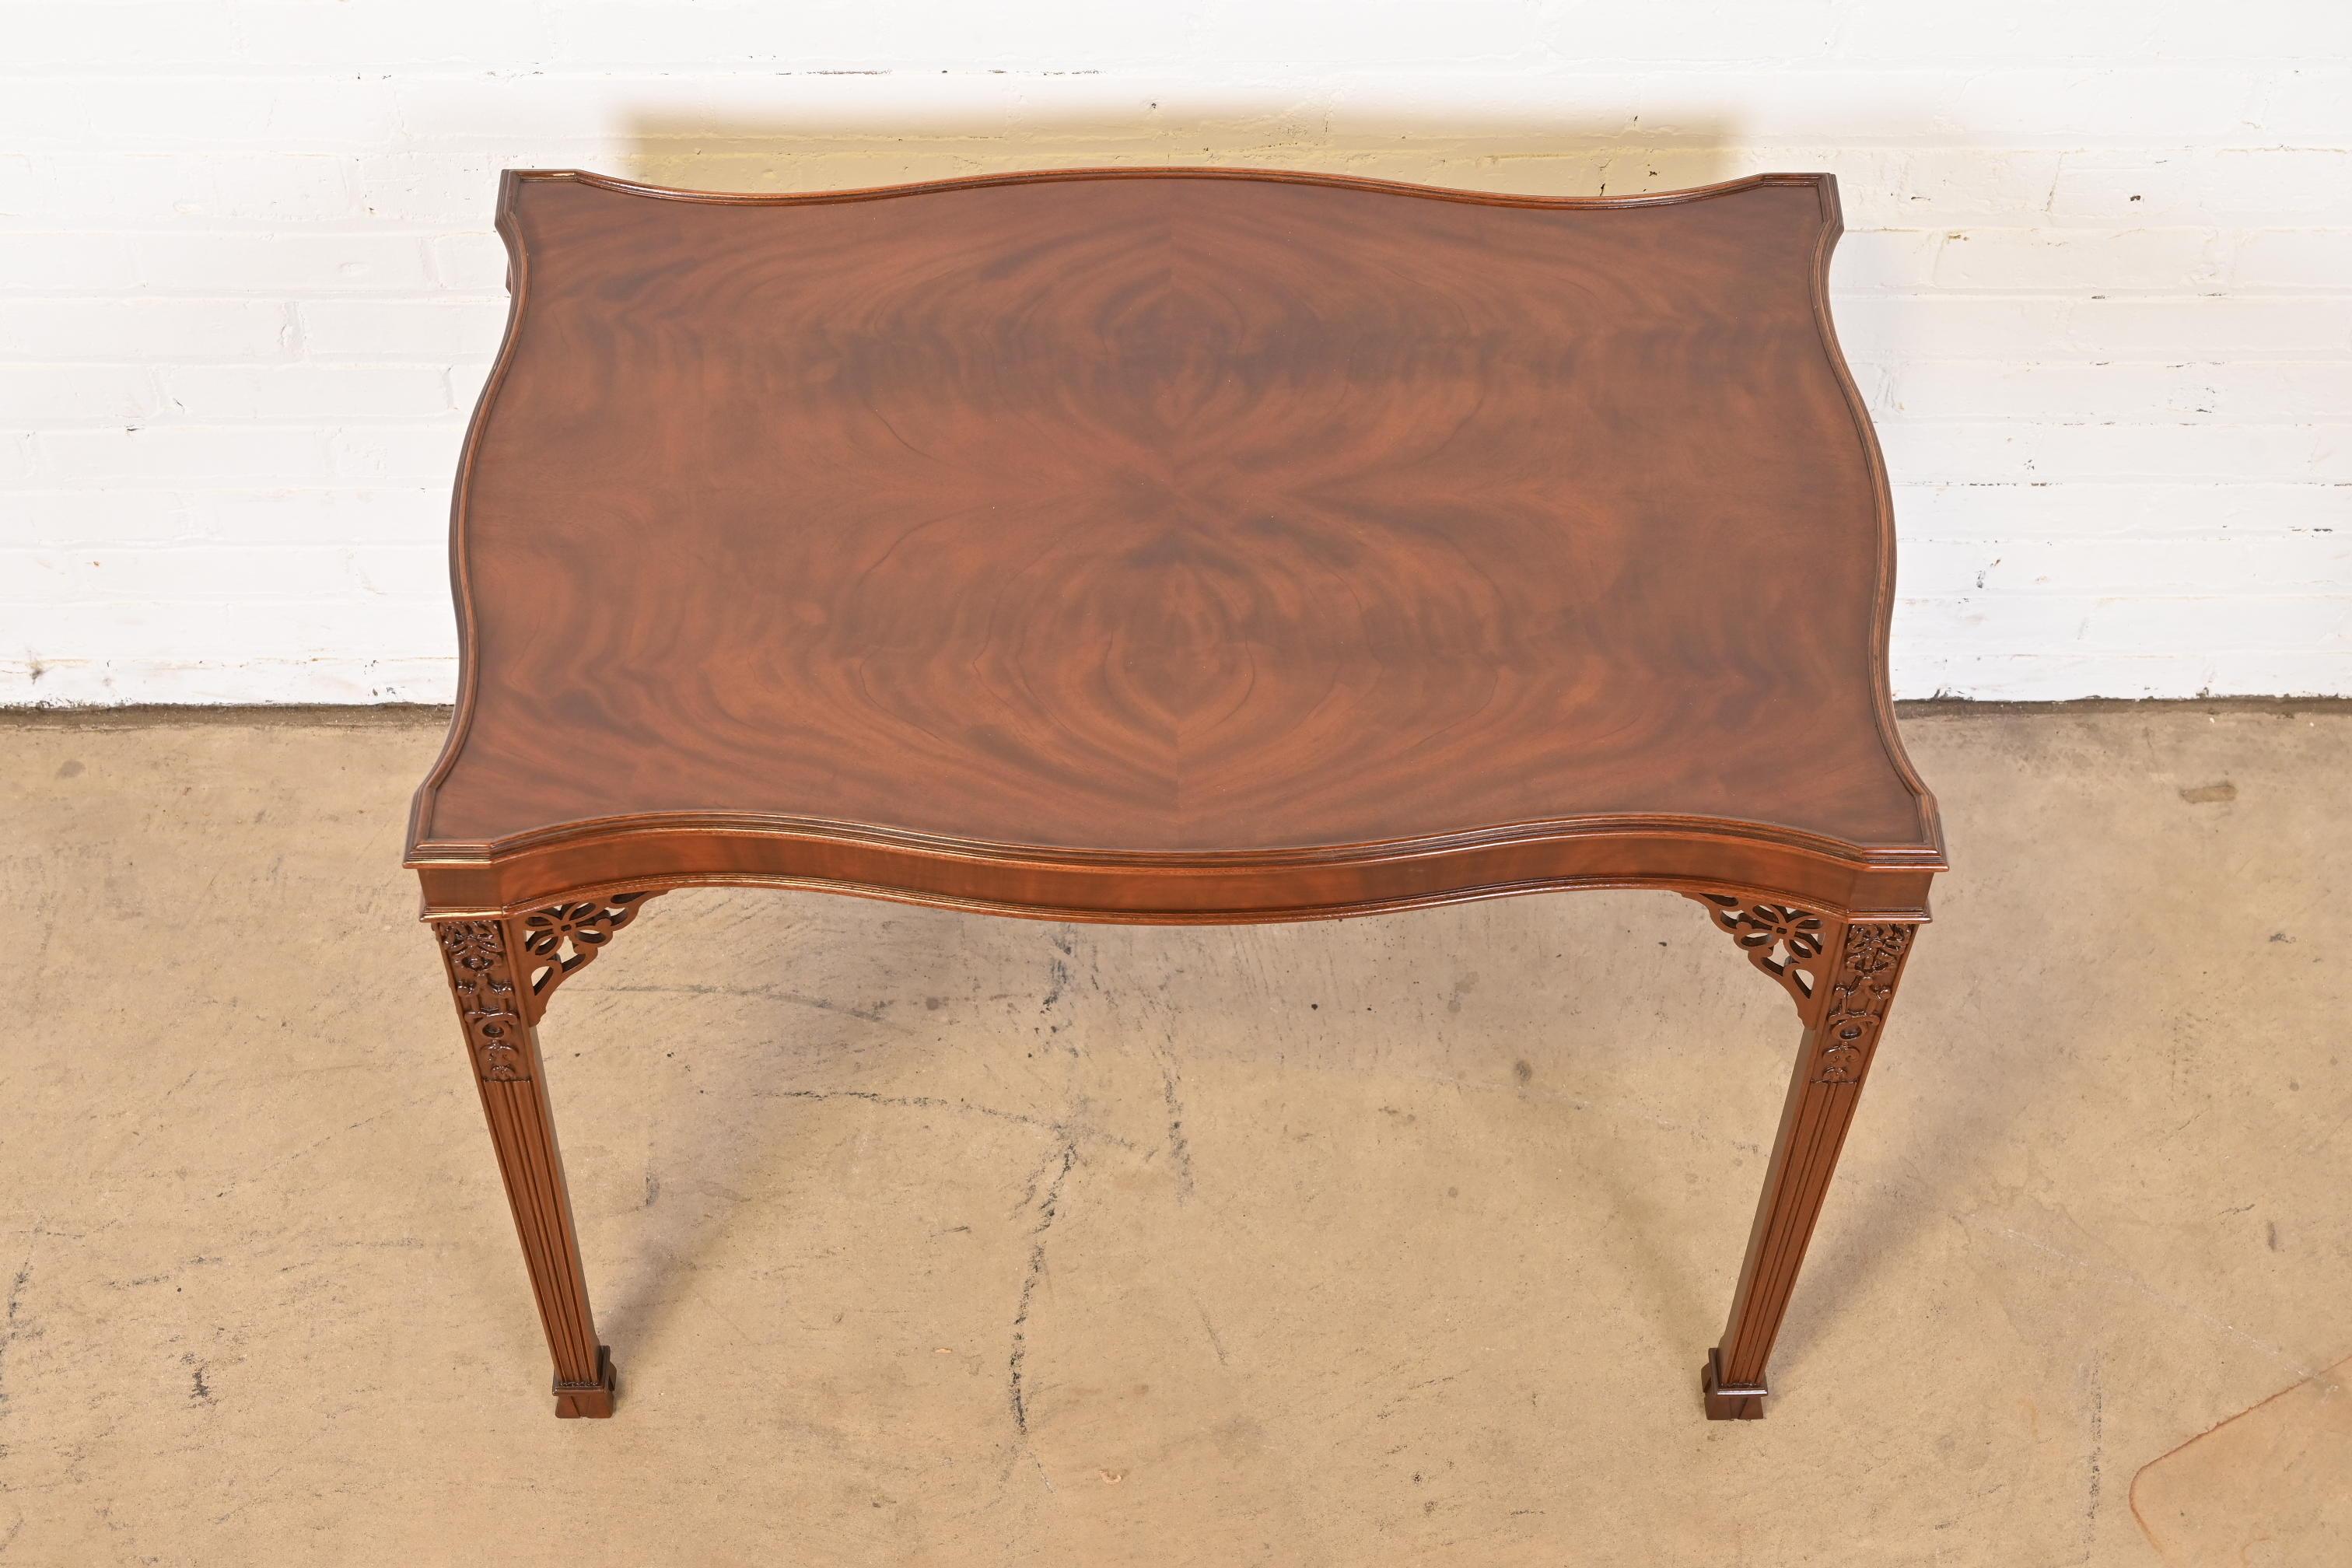 Baker Furniture Stately Homes Collection Carved Mahogany Tea Table, Refinished For Sale 2